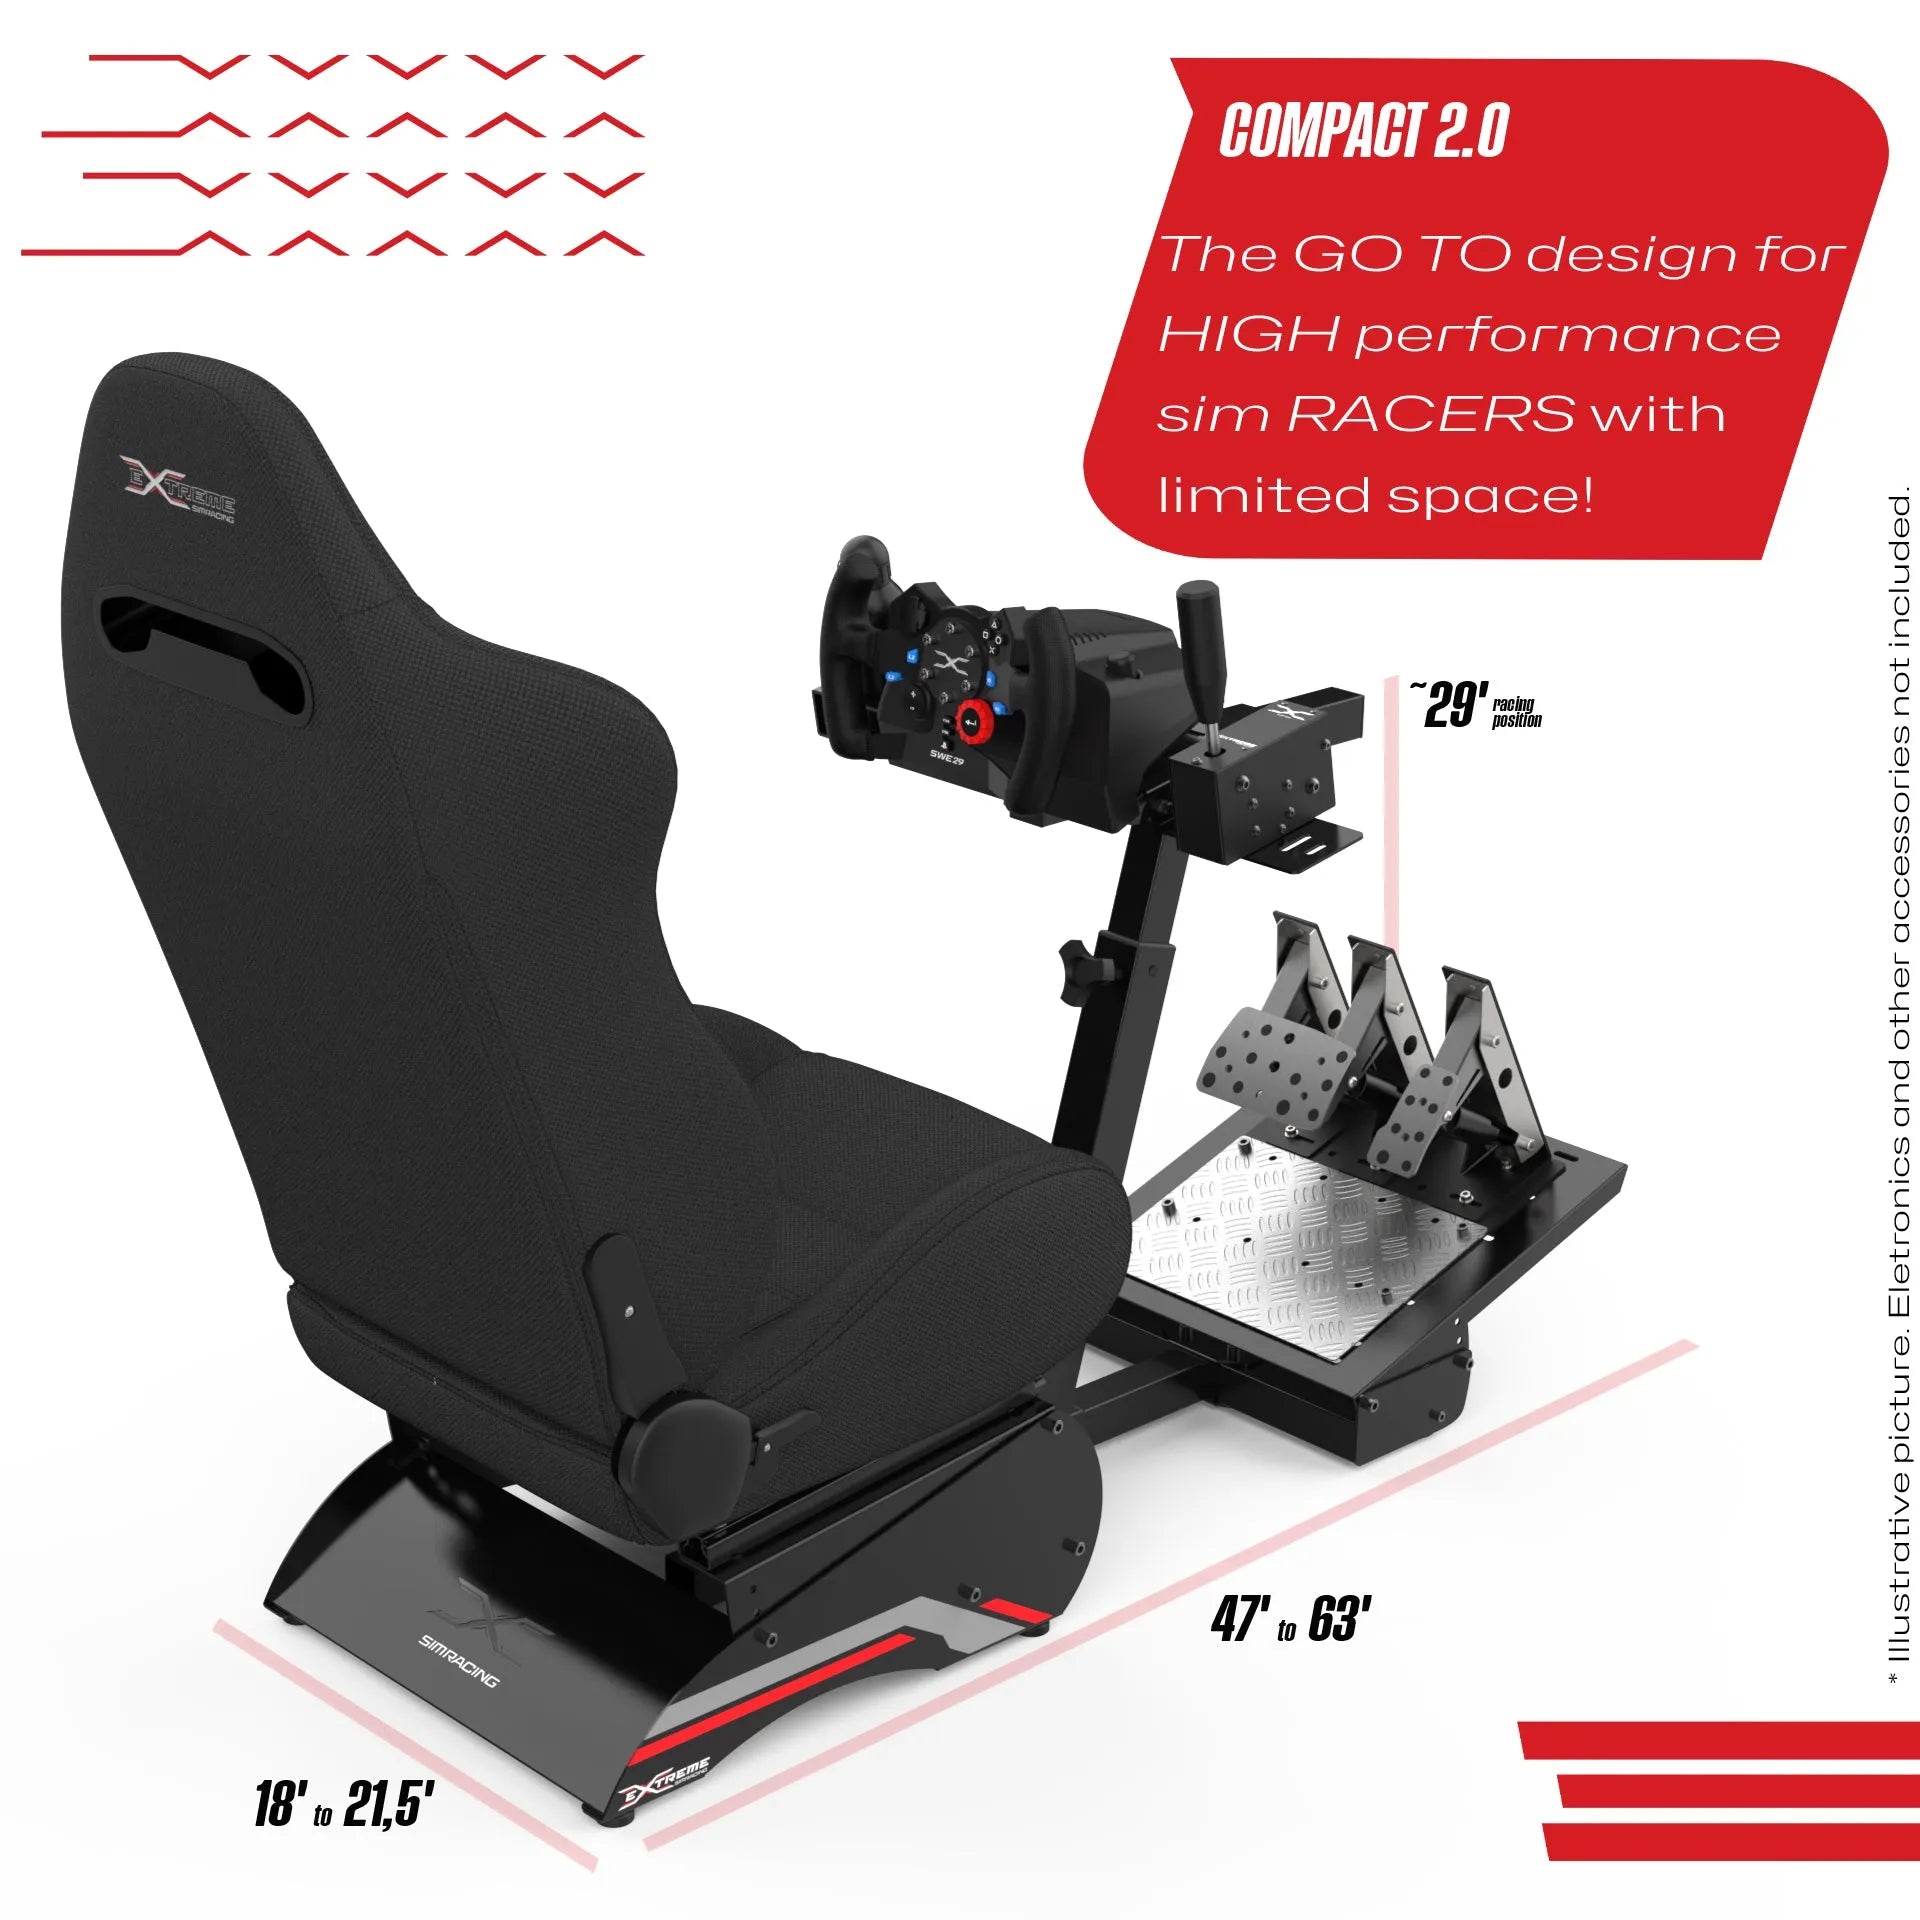 EXTREME SIMRACING COCKPIT COMPACT 2.0 - ASSEMBLY TUTORIAL 